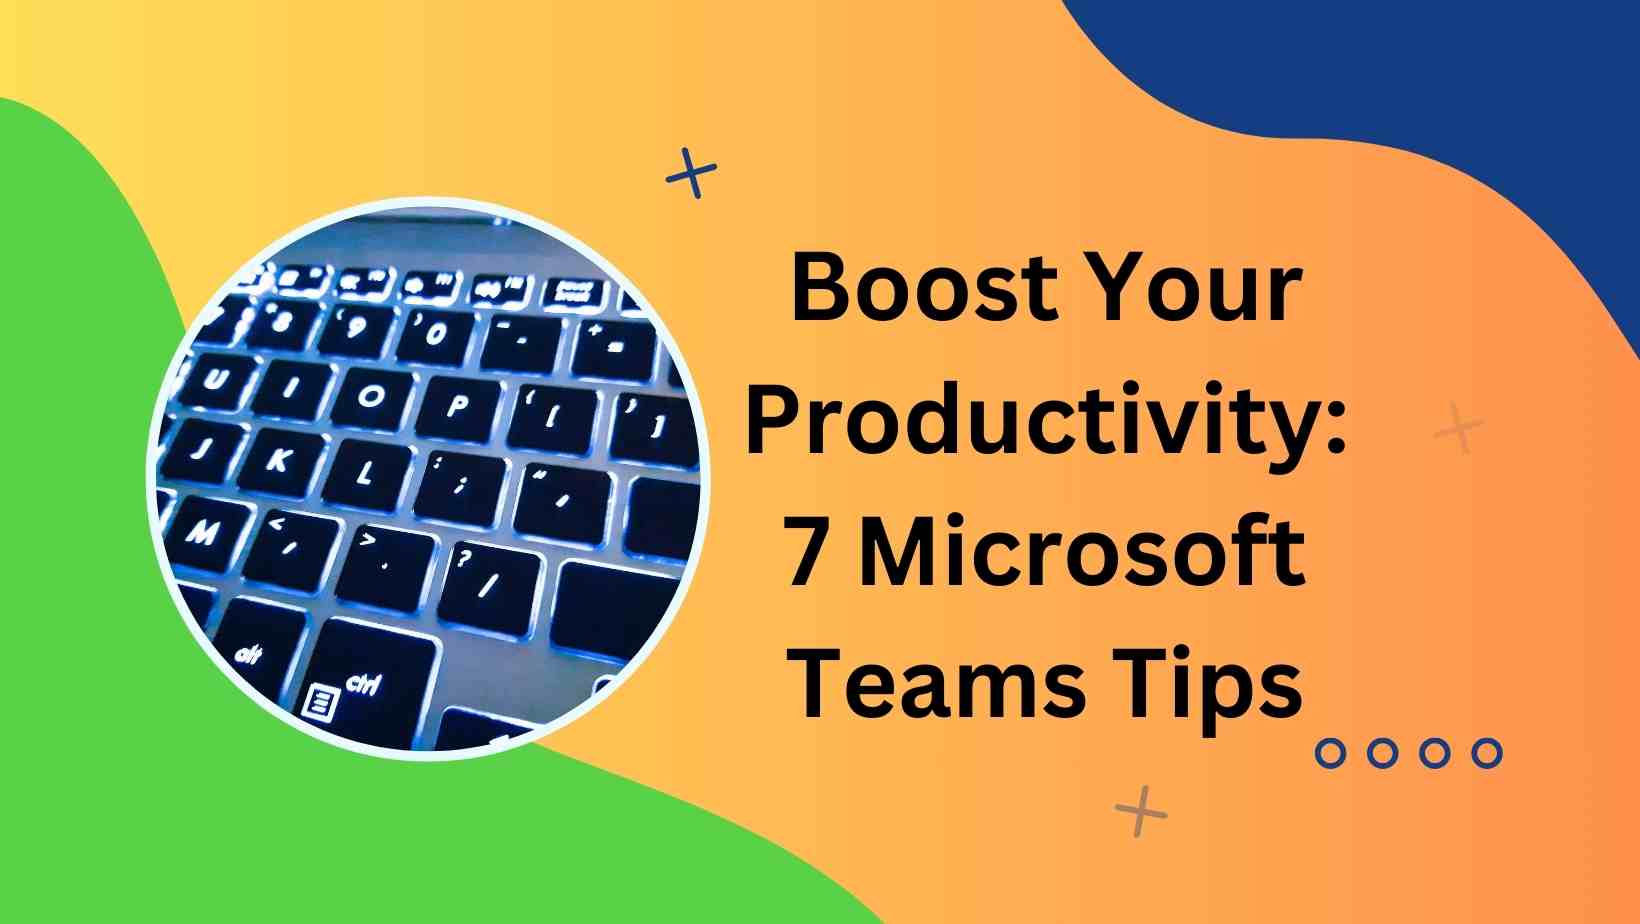 Boost Your Productivity: 7 Microsoft Teams Tips